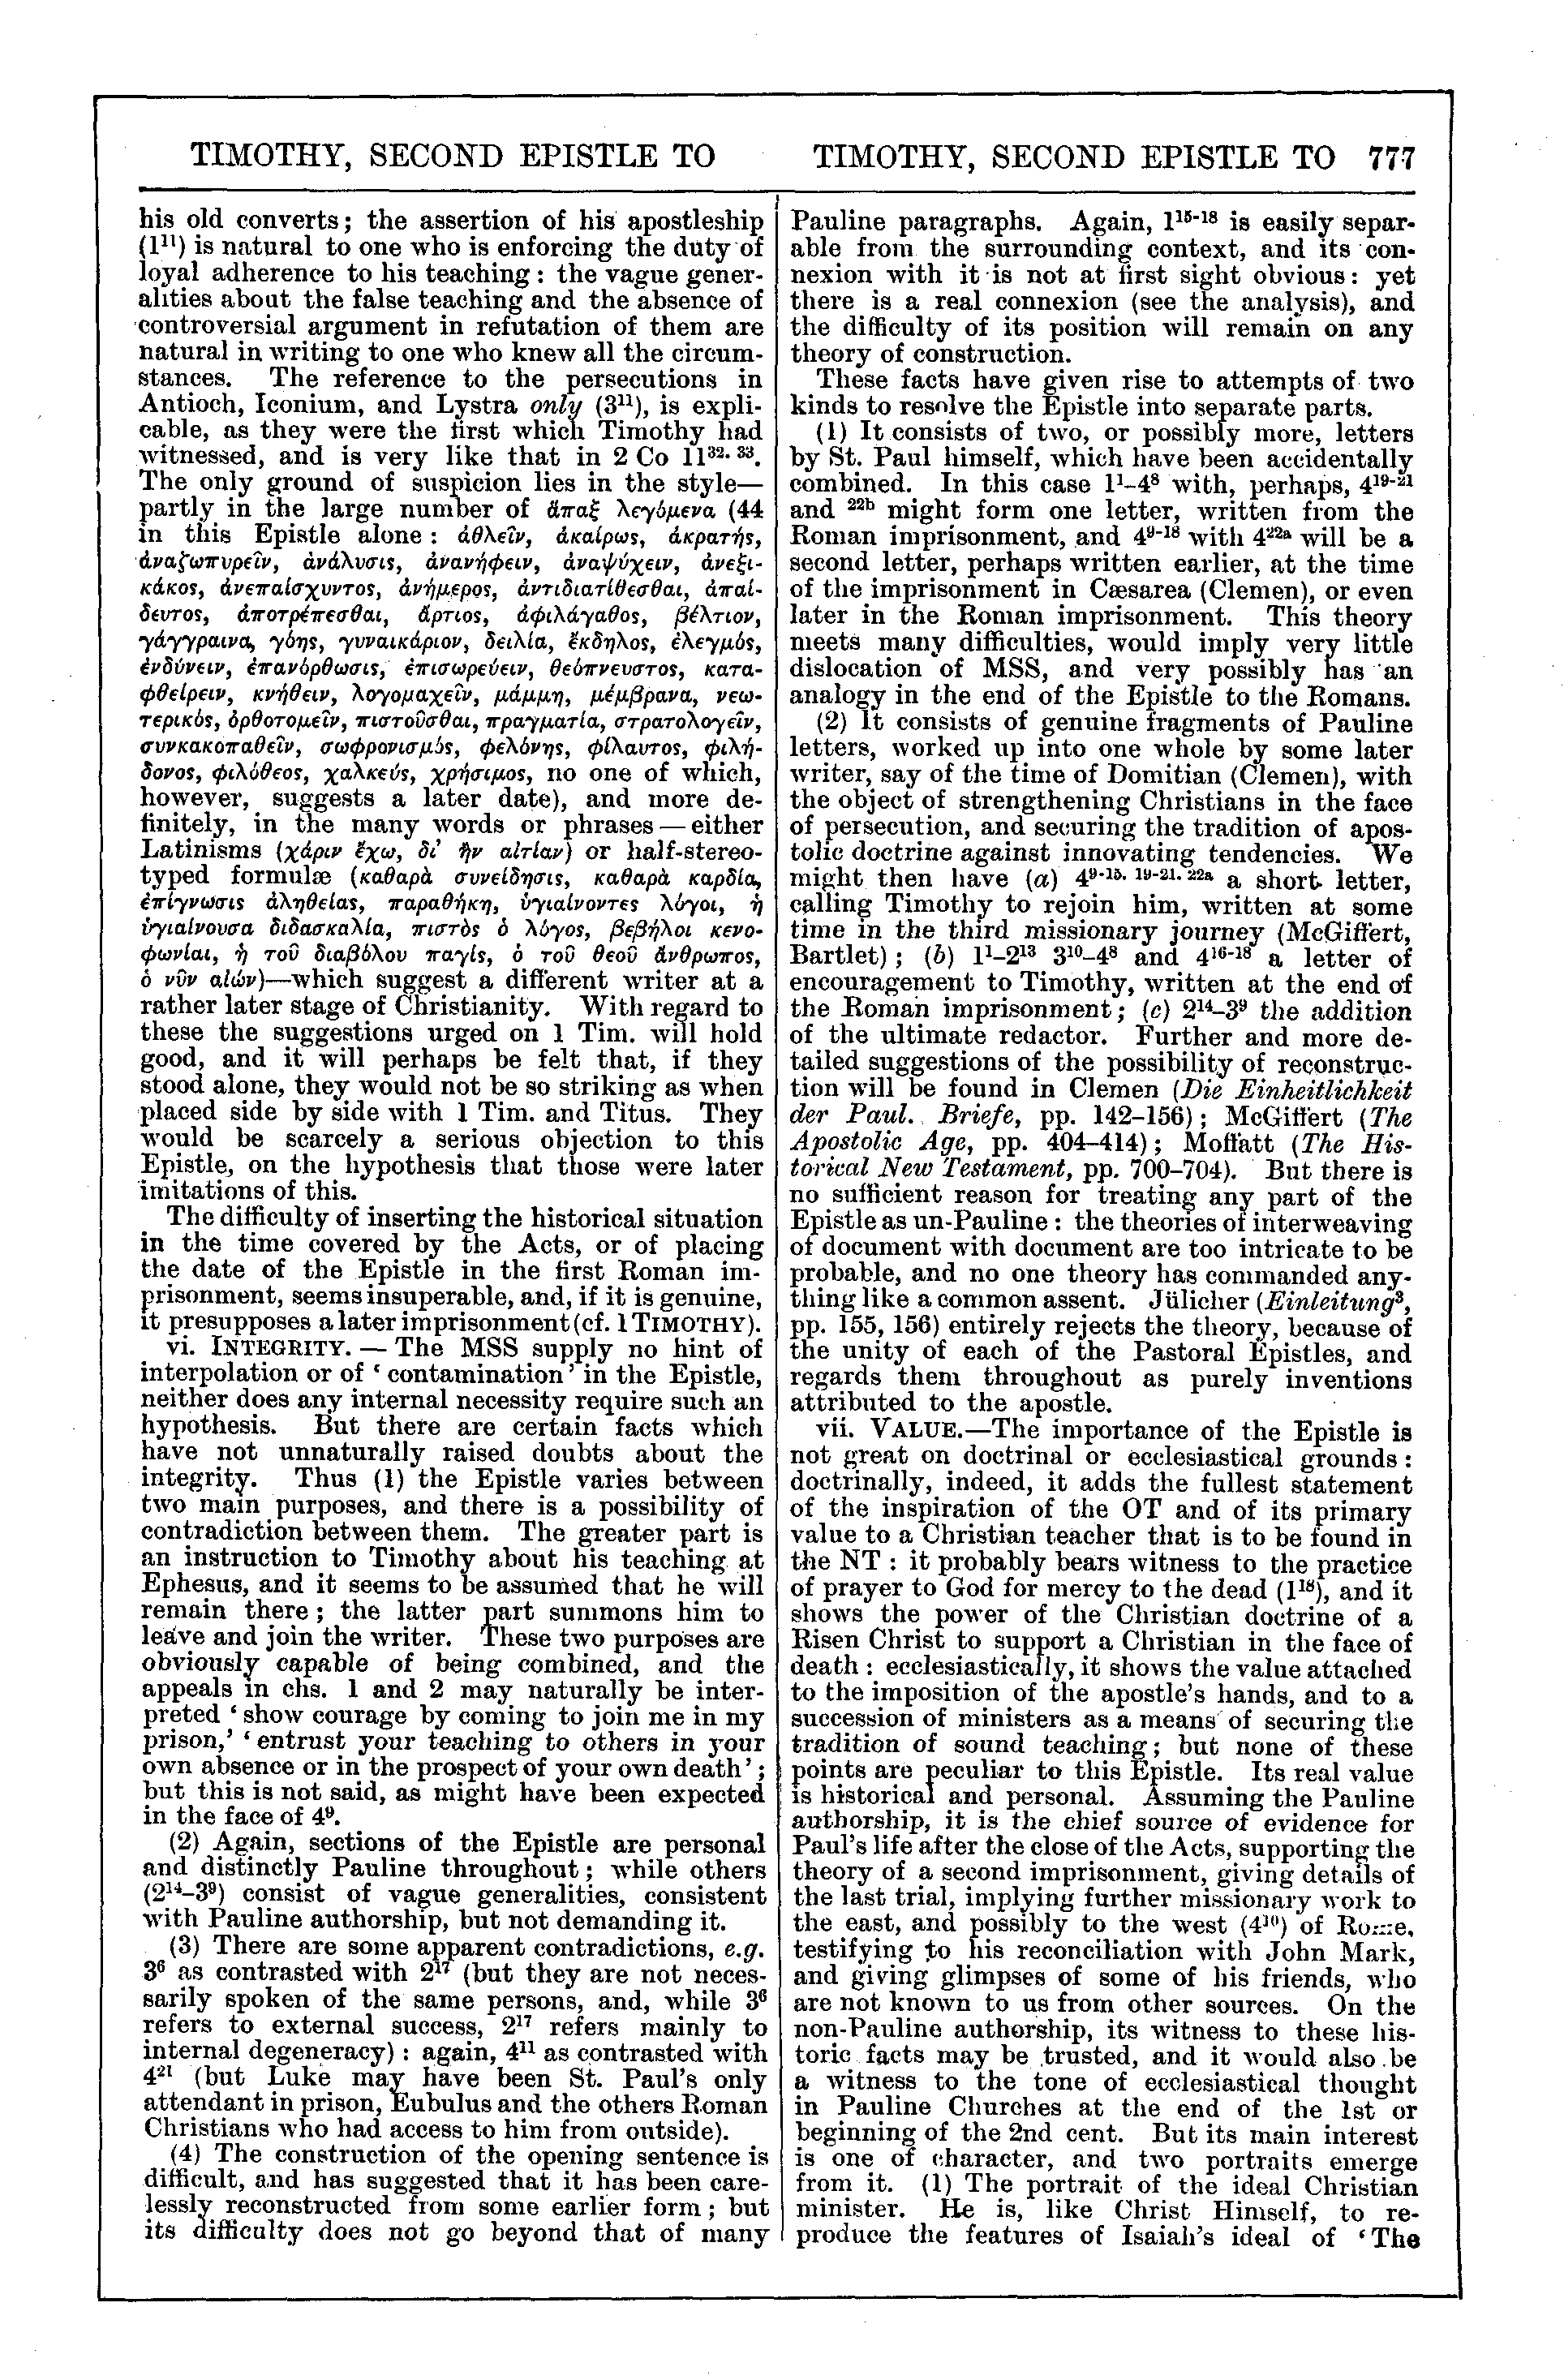 Image of page 777